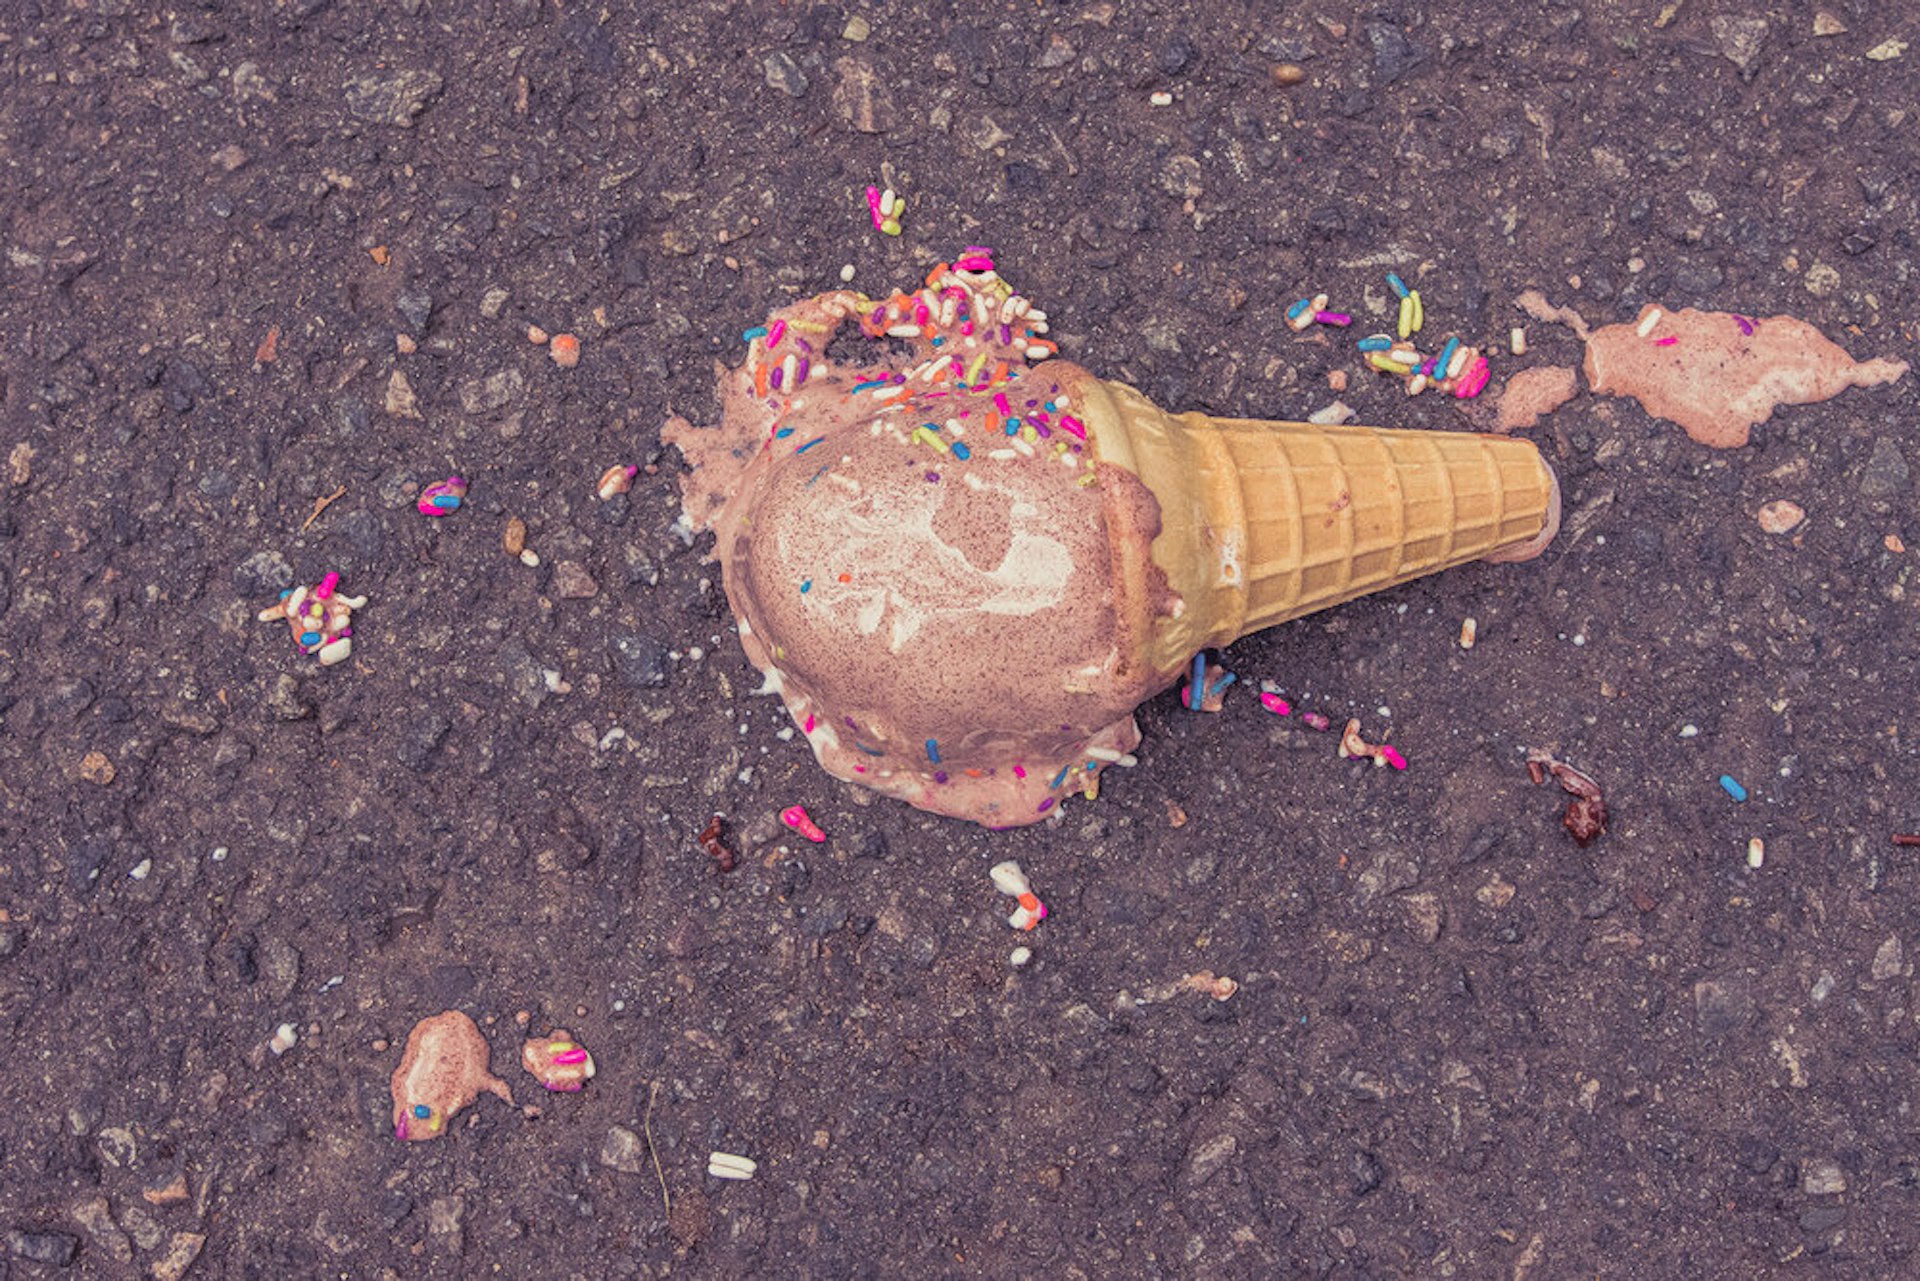 An ice cream with sprinkles that has fallen on the pavement.